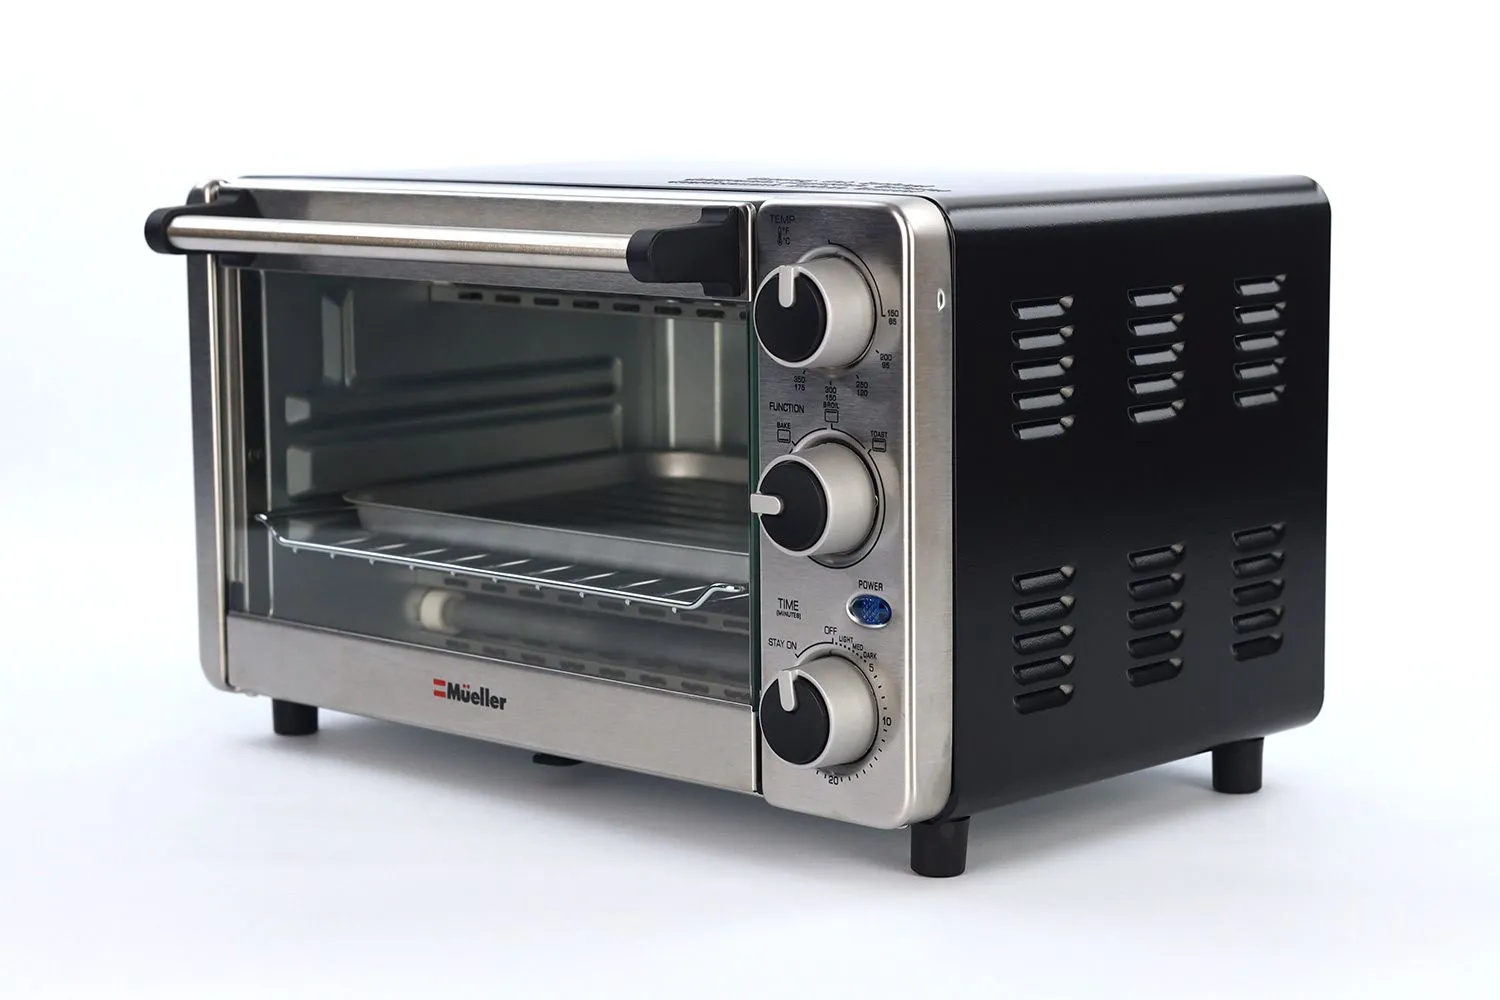 Tuesday's Deal of the Evening - Toaster Oven from Mueller Austria